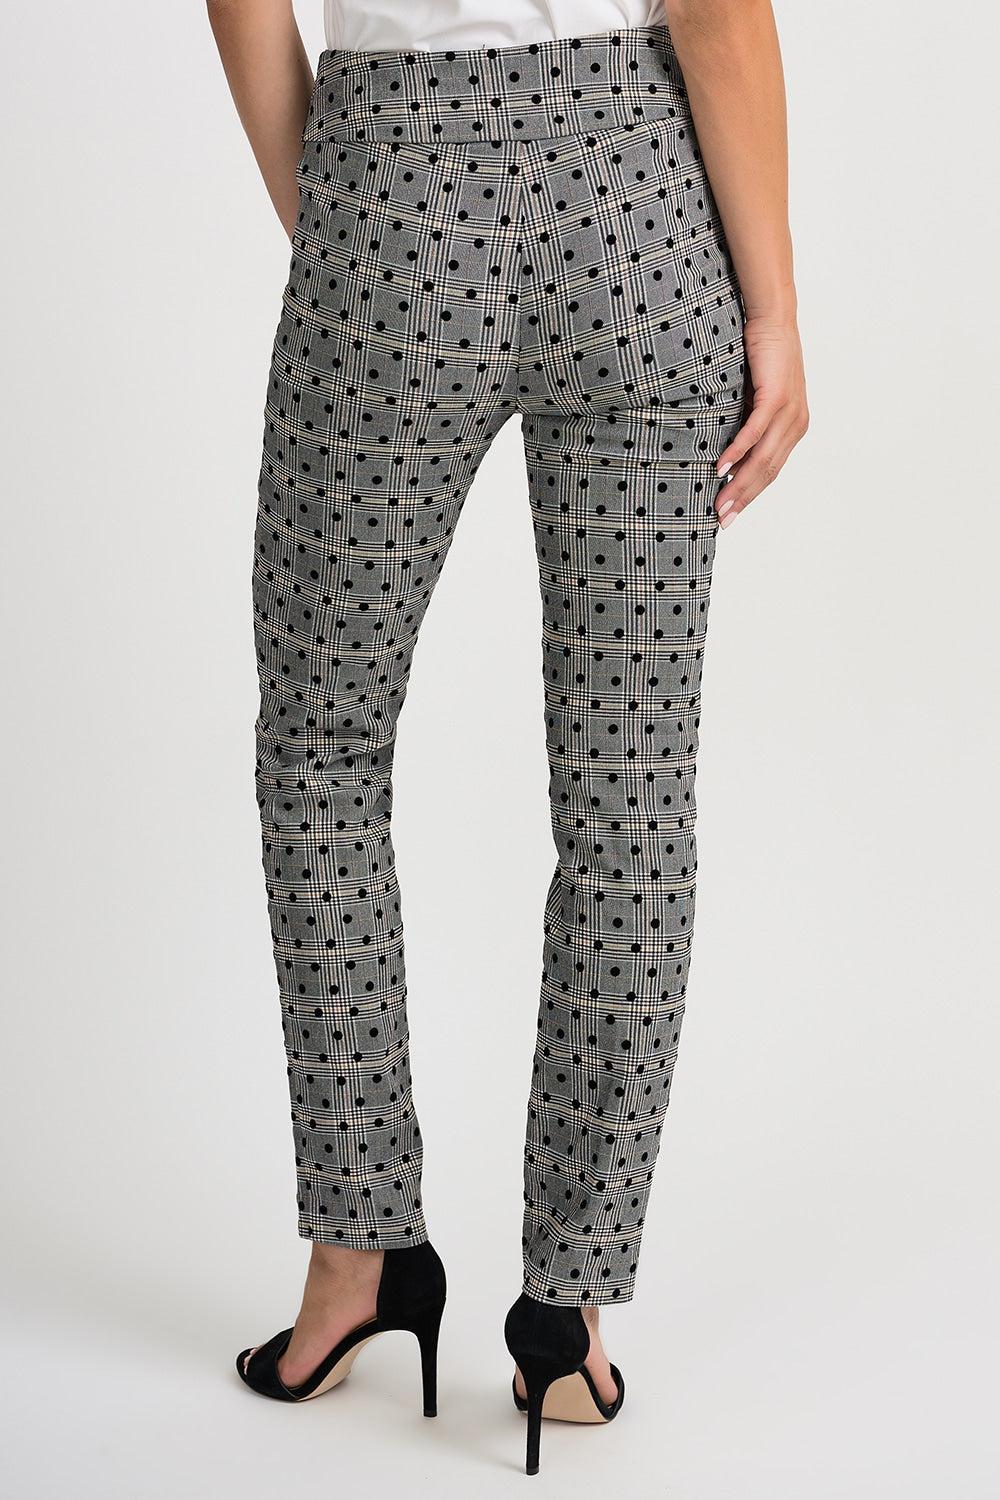 Joseph Ribkoff Pant Style 201647 Black/White/Brown from BelleMiaBoutique.com 